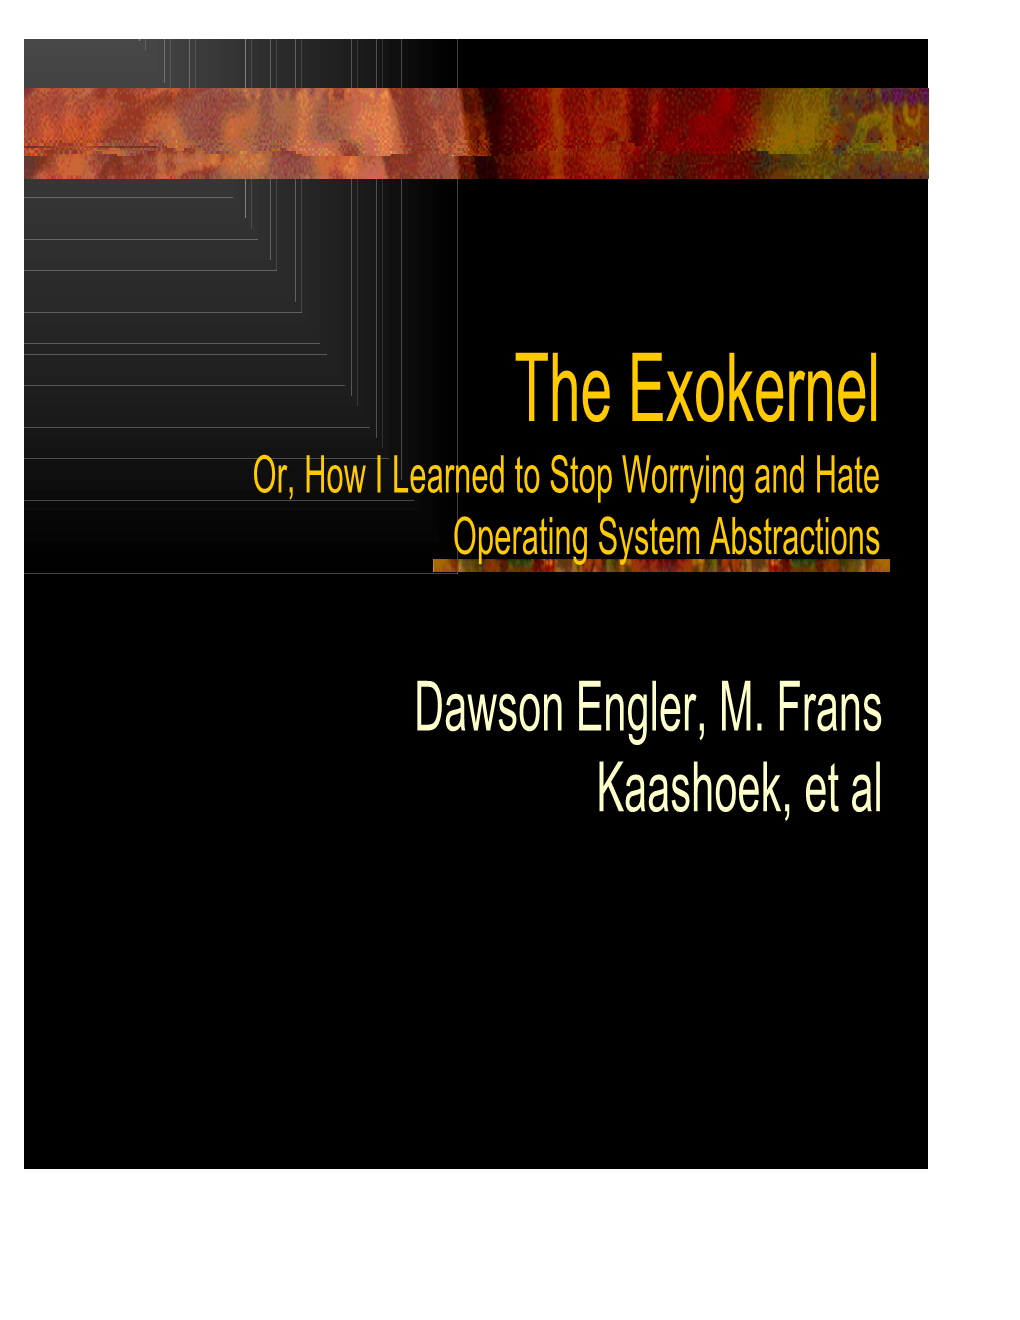 The Exokernel Or, How I Learned to Stop Worrying and Hate Operating System Abstractions